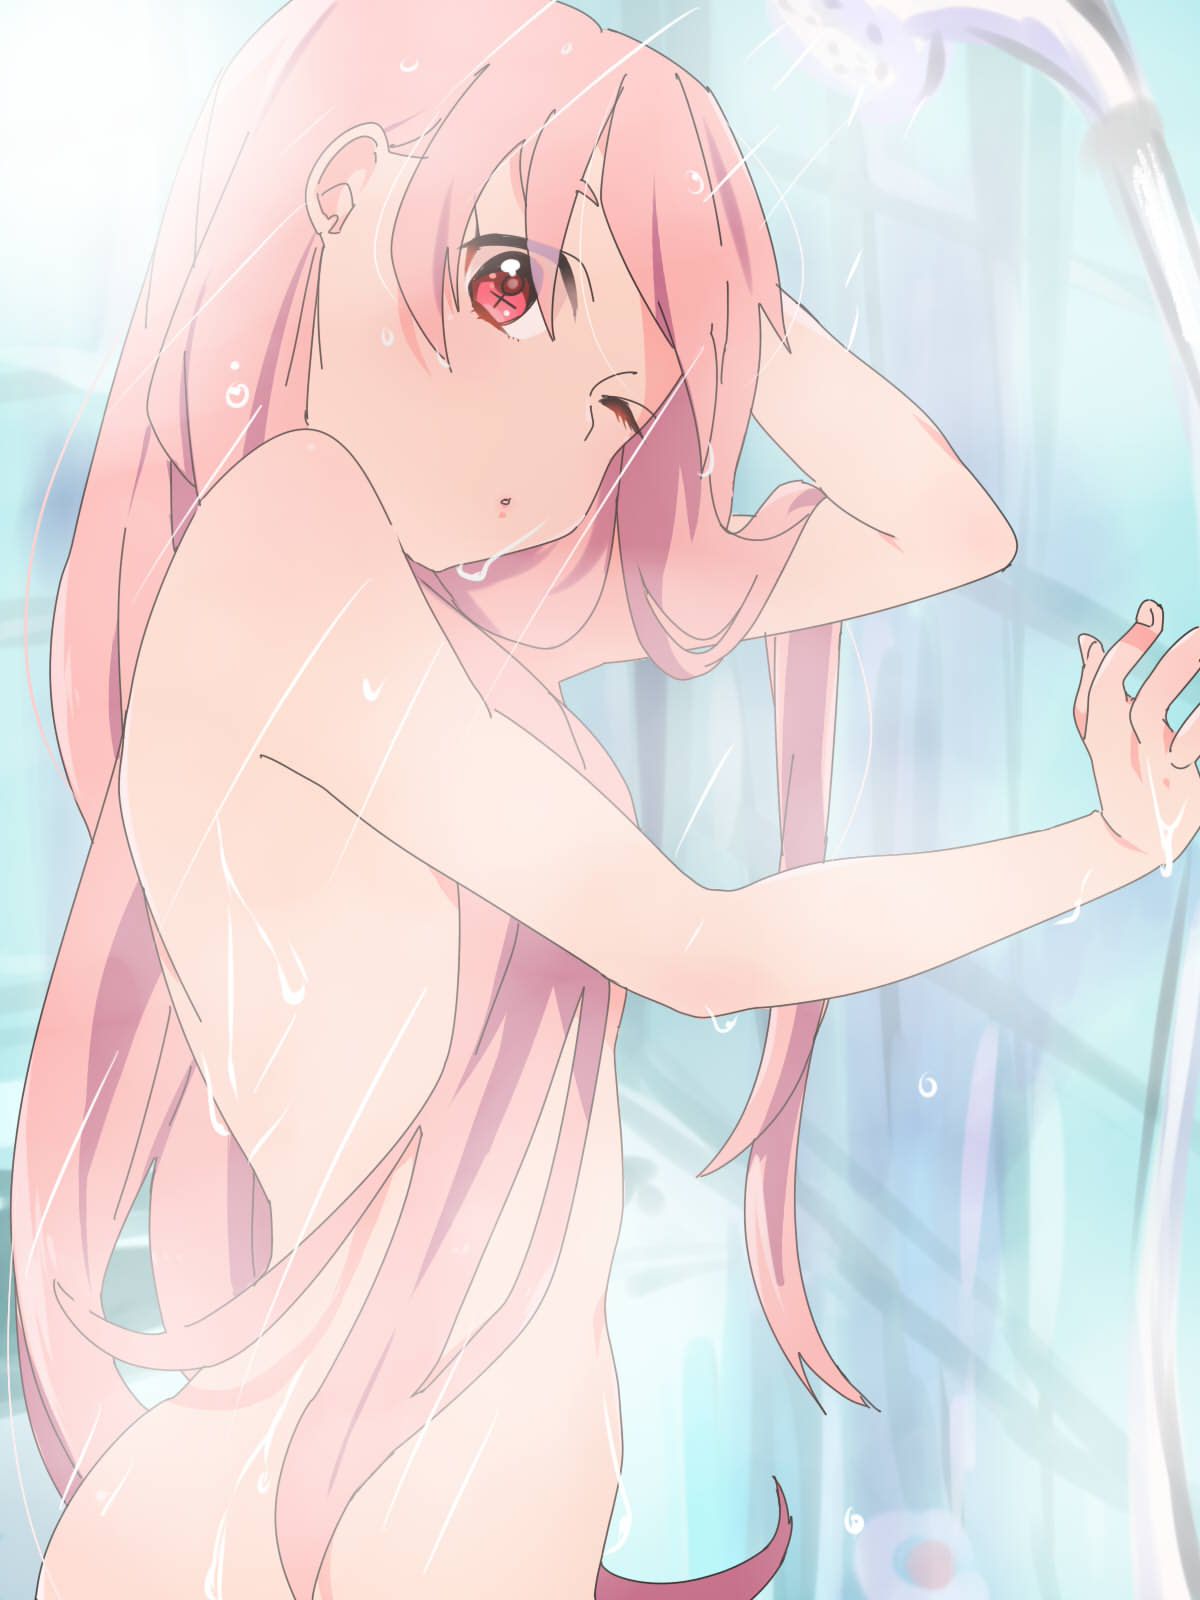 Don't you want to see the girl taking a bath? Don't you want to see a girl doing something in the bathroom? I want to see! 【Two-Dimensional】 27